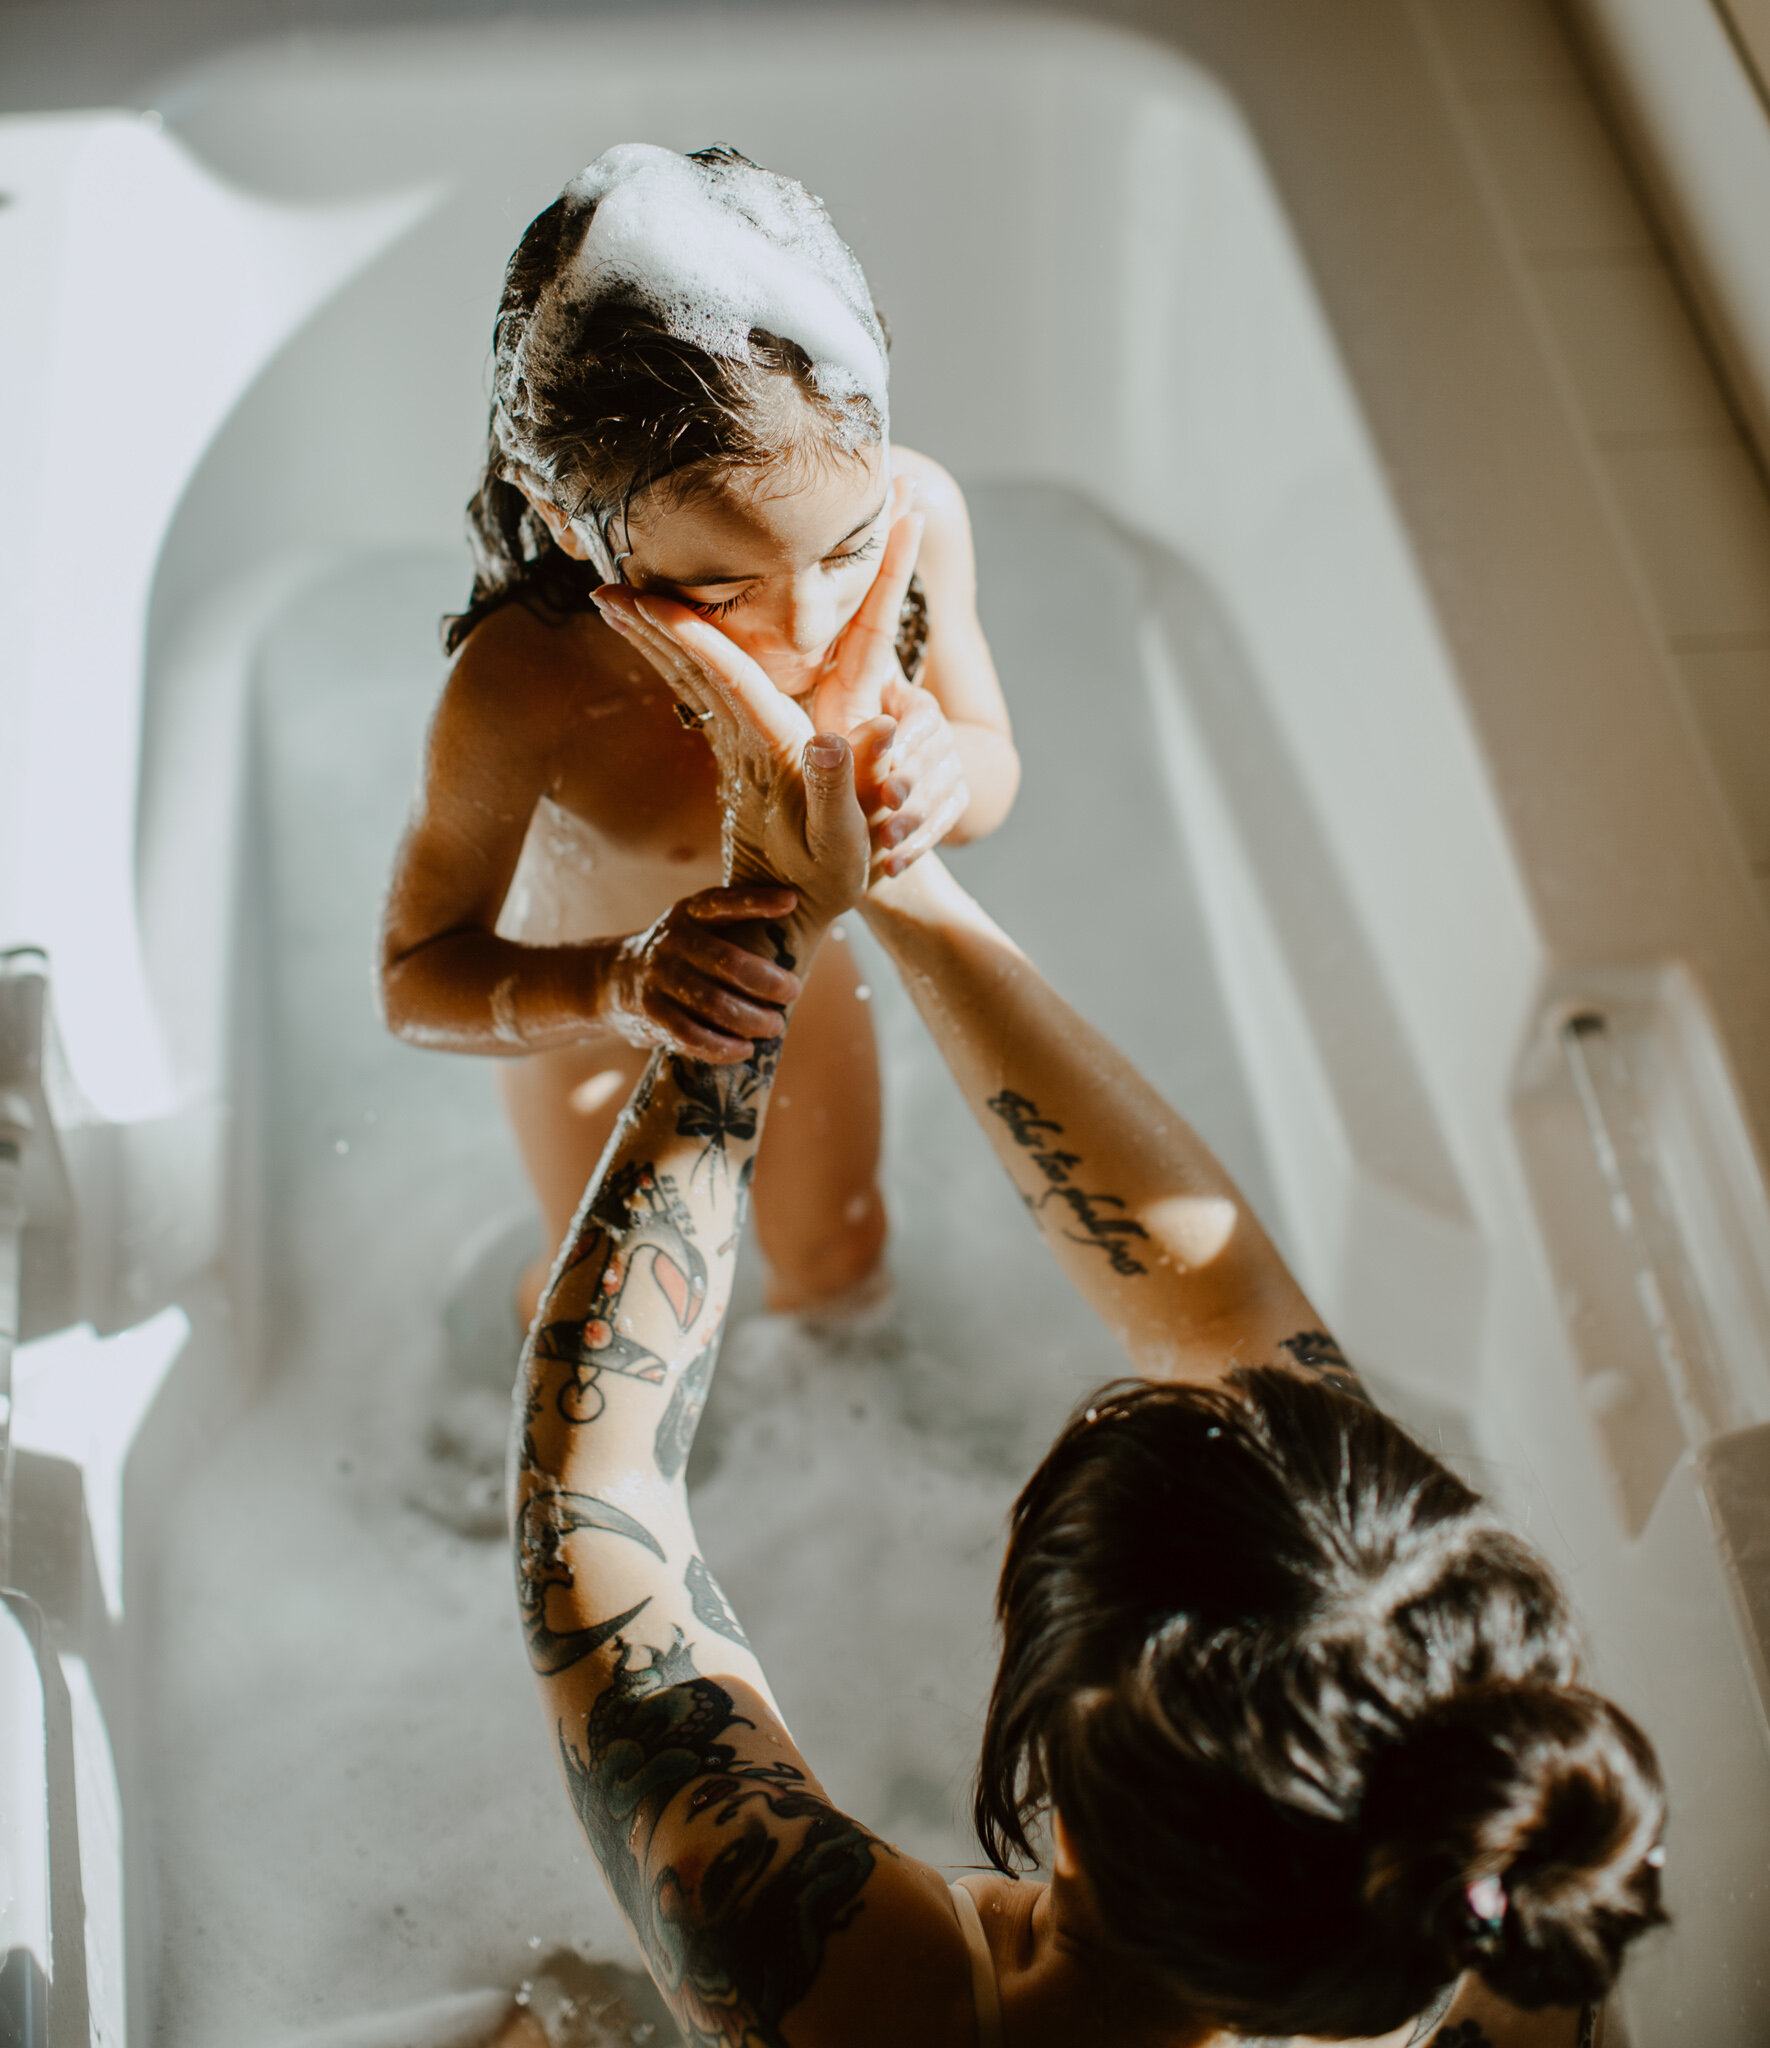 mother and child in tub with bubbles